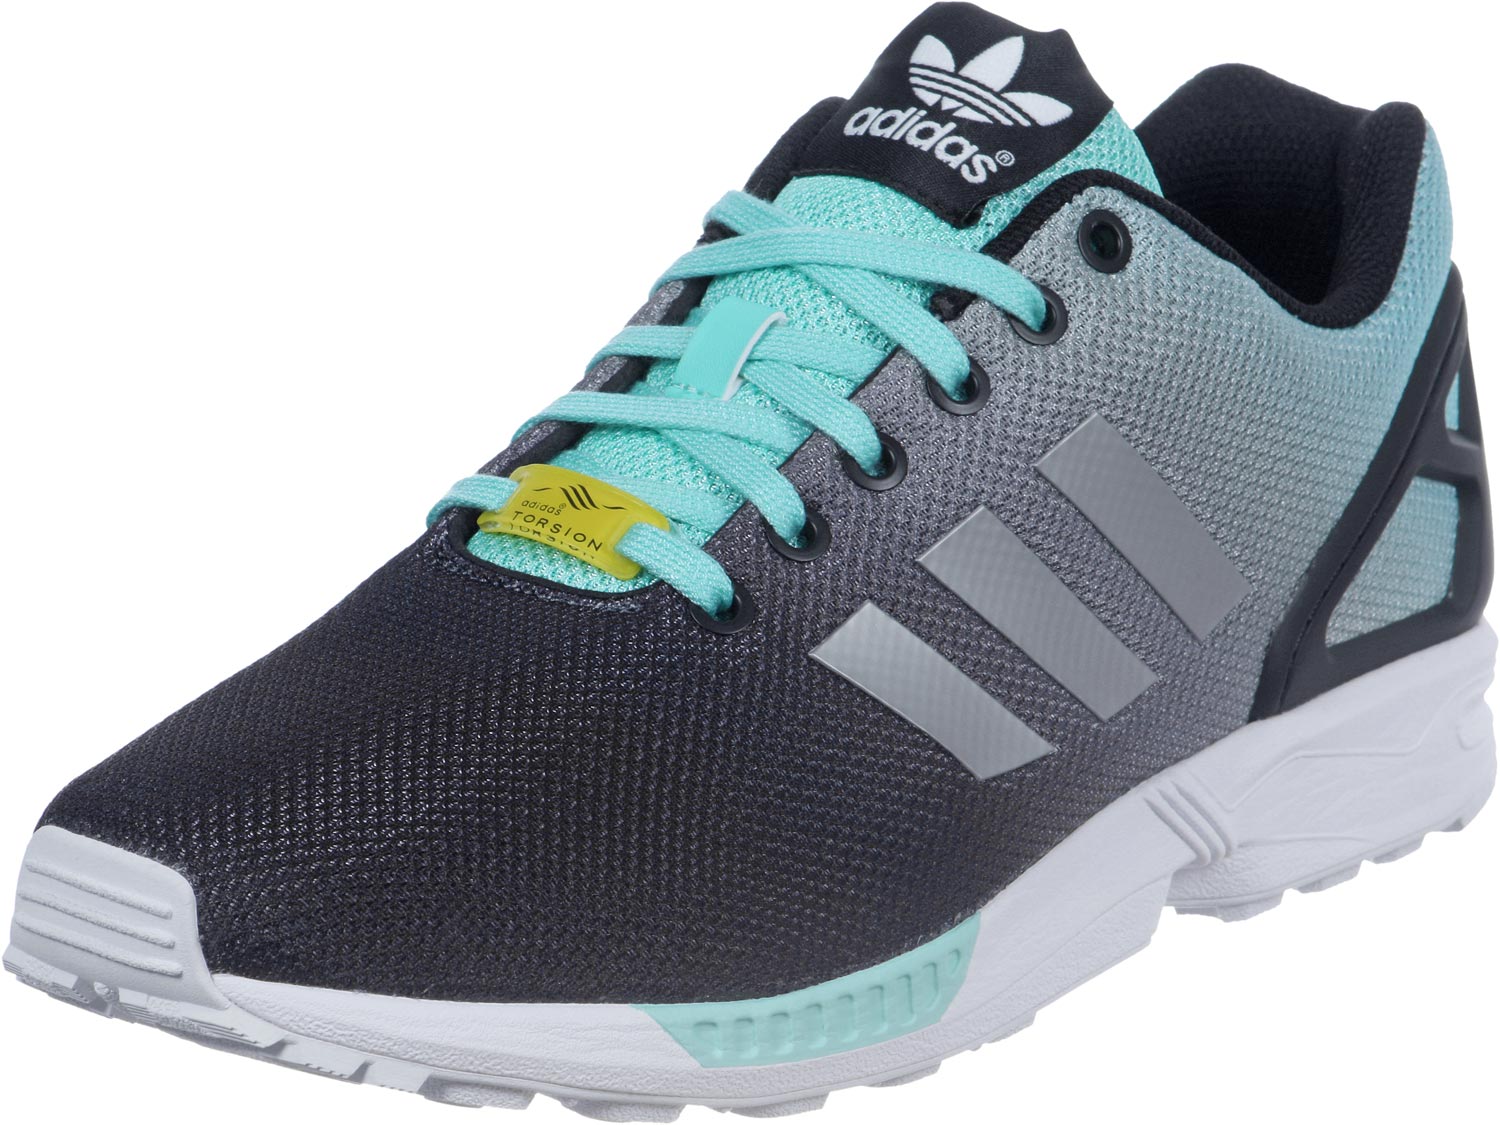 adidas zx flux femme turquoise